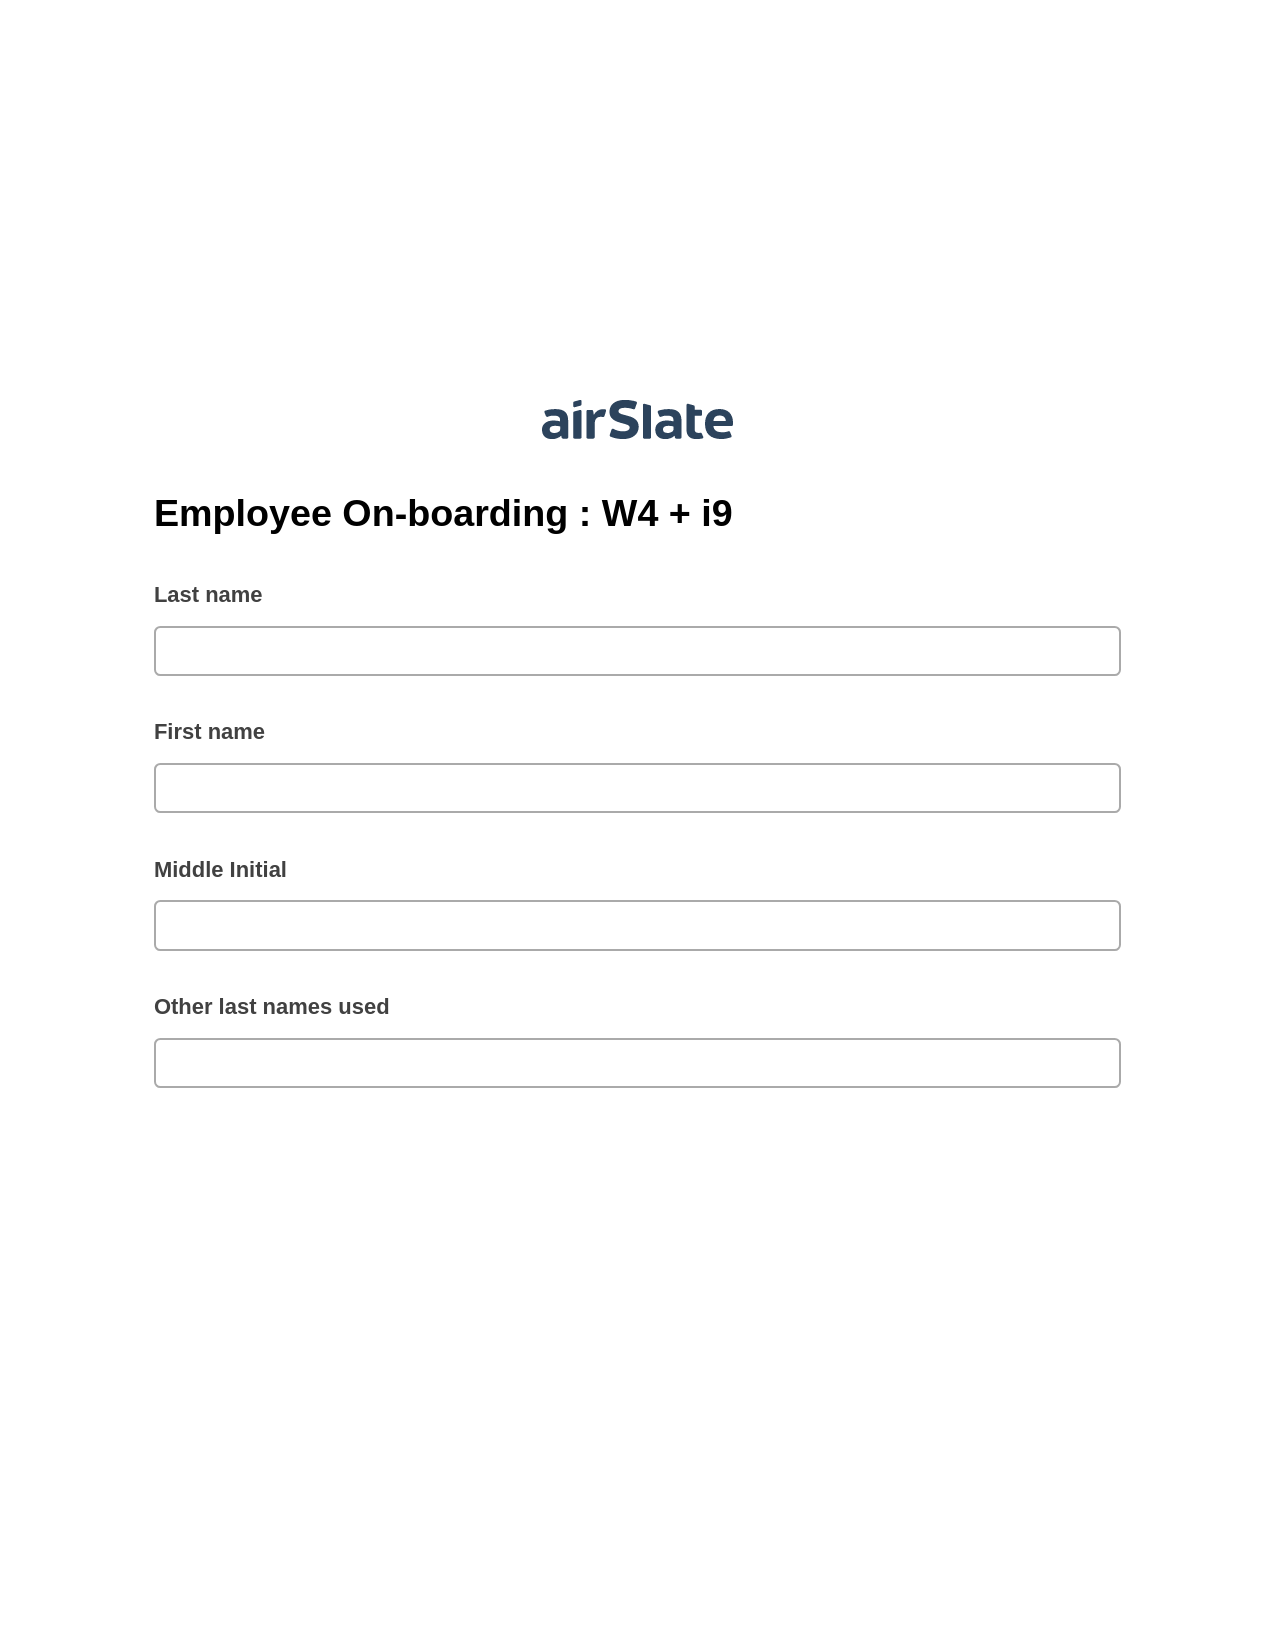 Employee On-boarding : W4 + i9 Pre-fill Slate from MS Dynamics 365 Records Bot, Unassign Role Bot, Email Notification Postfinish Bot